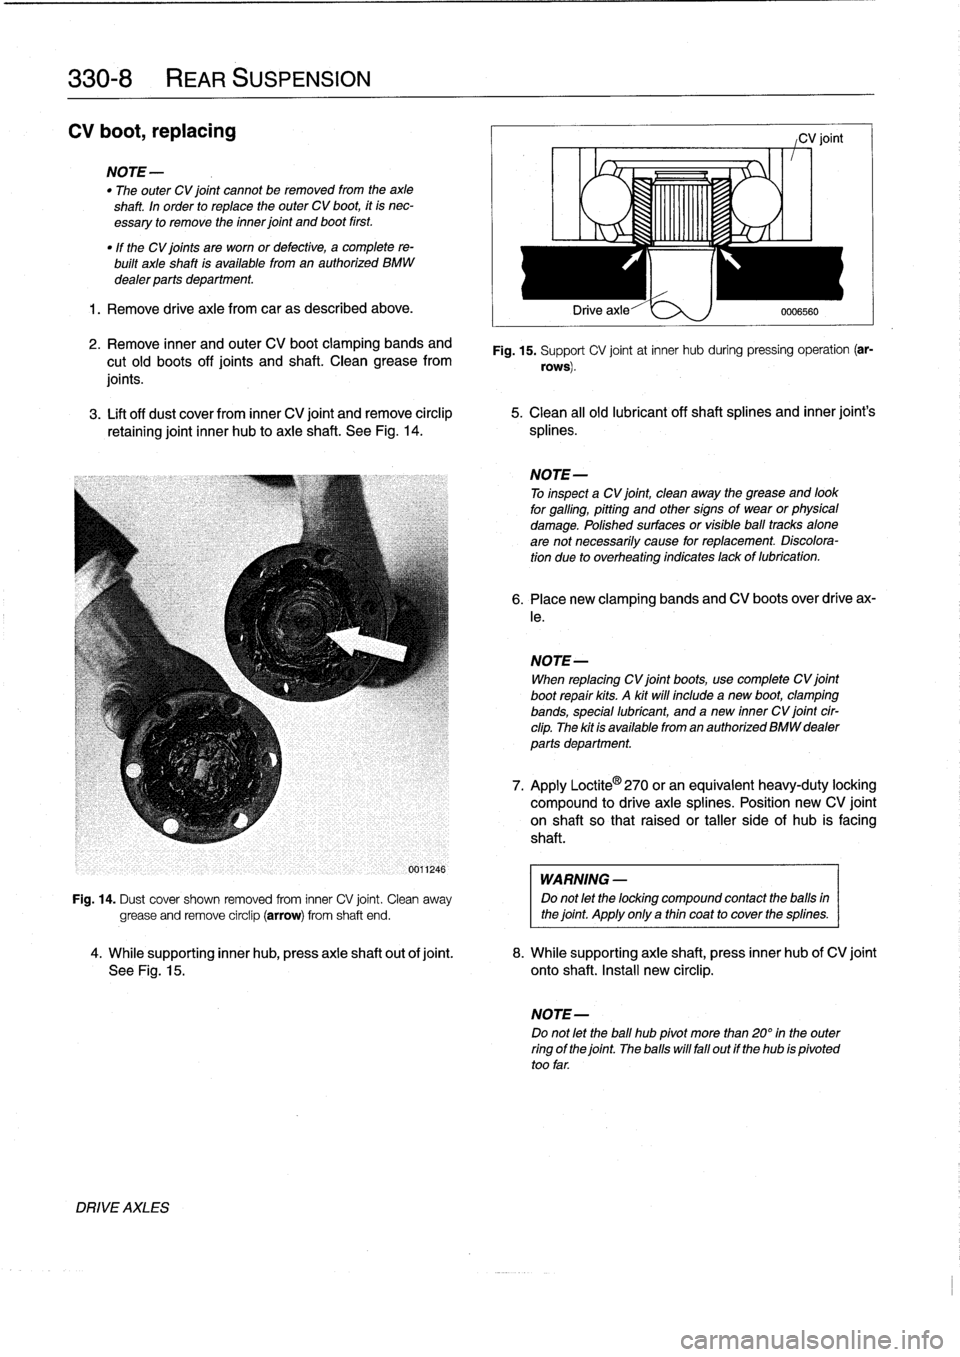 BMW 323i 1997 E36 Workshop Manual 
330-
8

	

REAR
SUSPENSION

CV
boot,
replacing

NOTE-

"
The
outer
CV
joint
cannot
be
removed
from
the
axle
shaft
.
In
order
to
replace
the
outer
CV
boot,
it
is
nec-
essary
to
remove
the
inner
joint
